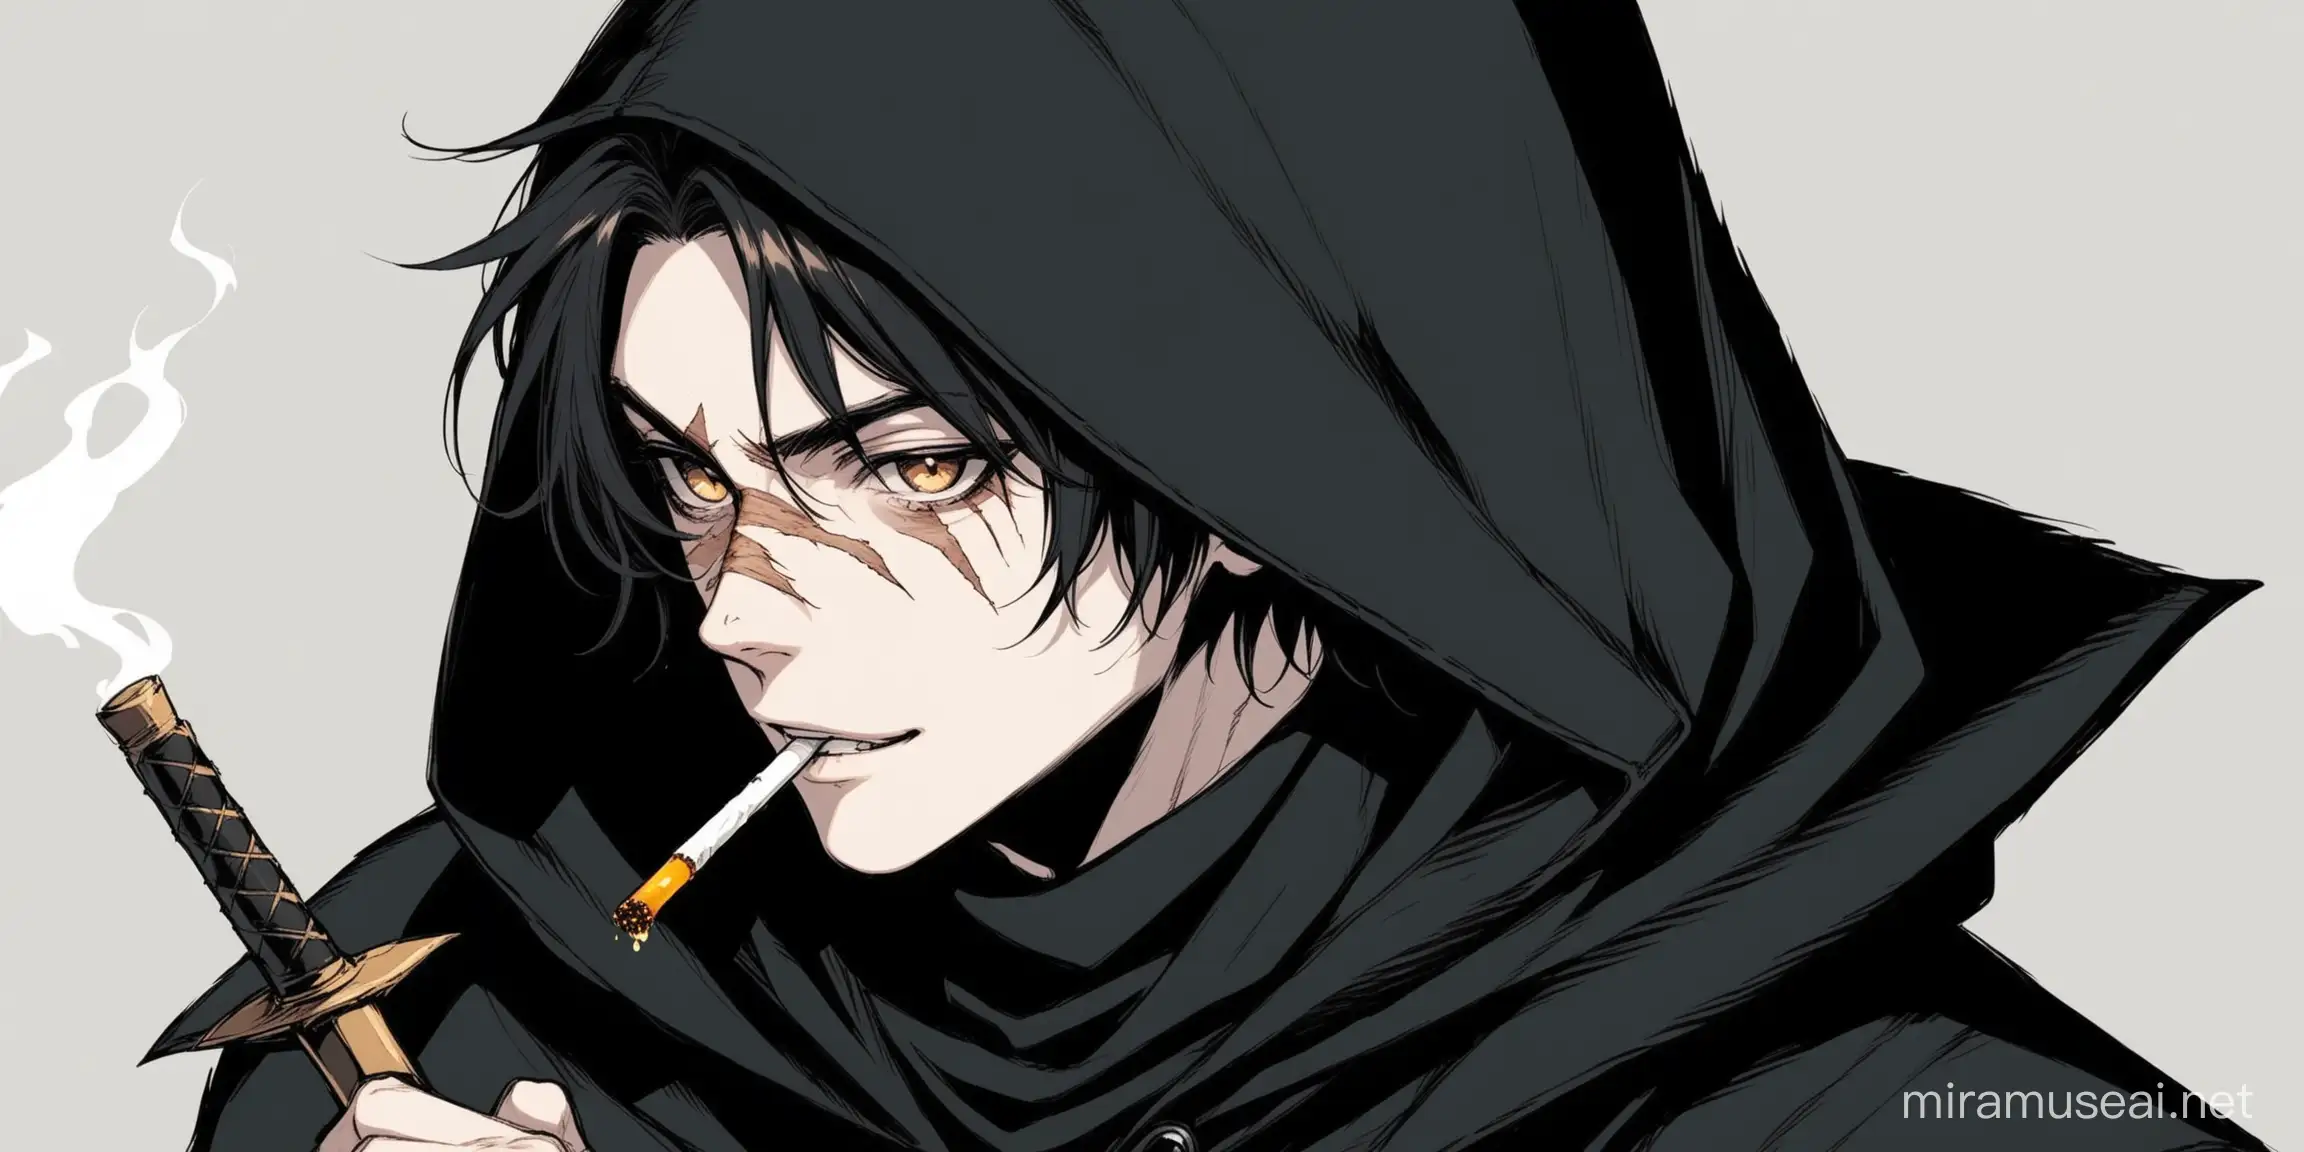 young boy, pale skin and black hair, deep eyes, wears a black cloak similar to a coat with a hood, he has a cigarette in his mouth and a scar in his eye, he has brown eyes of honey, the face has a sarcastic smile clothes like a rogue, but kind of modern
carries two black daggers
